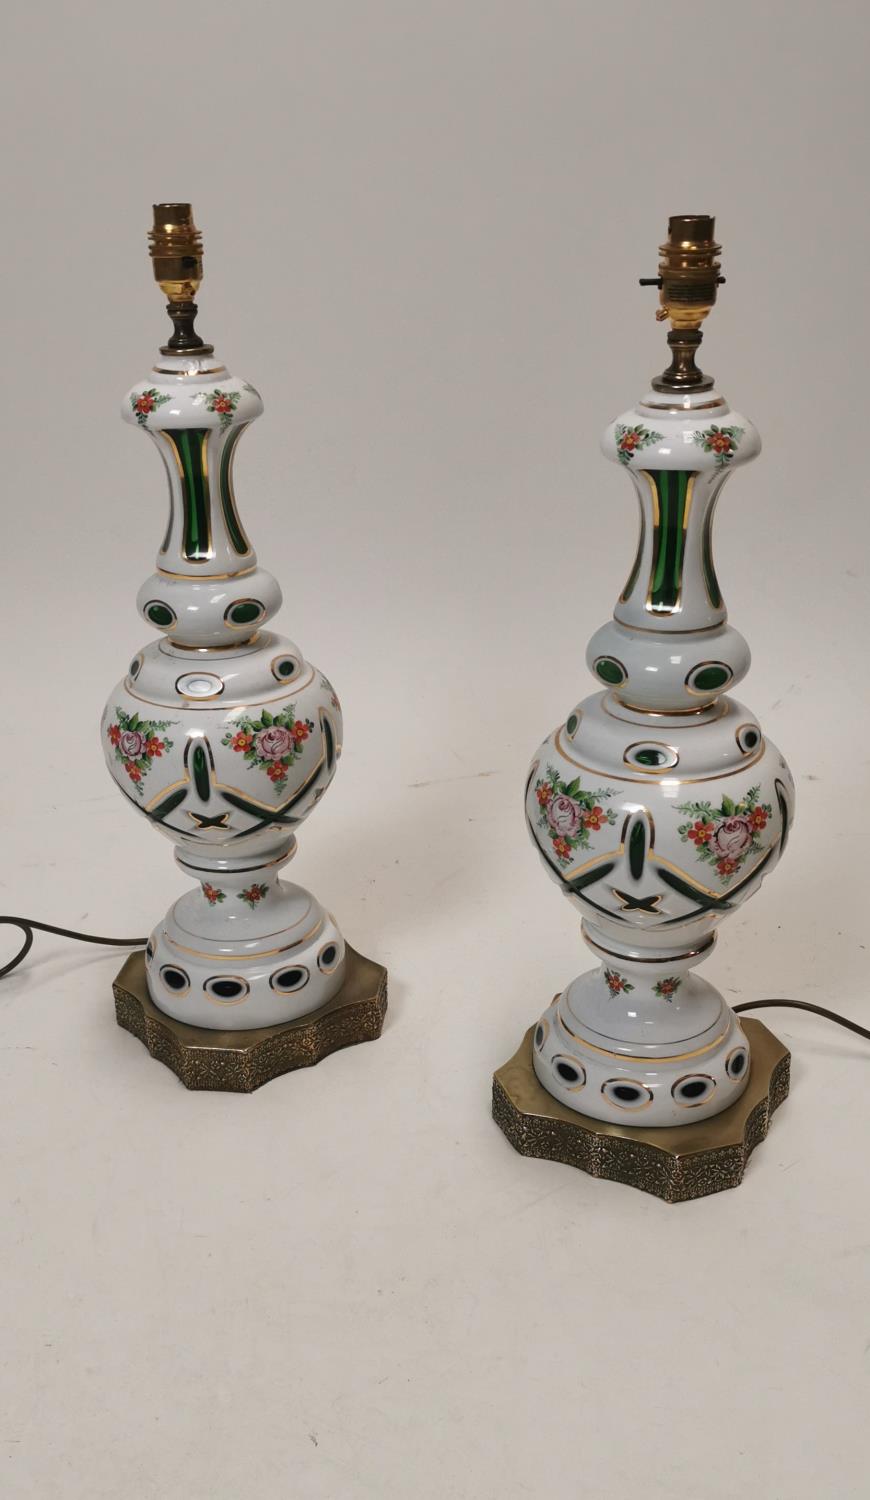 Pair of exceptional quality 19th C. hand painted glass table lamps.